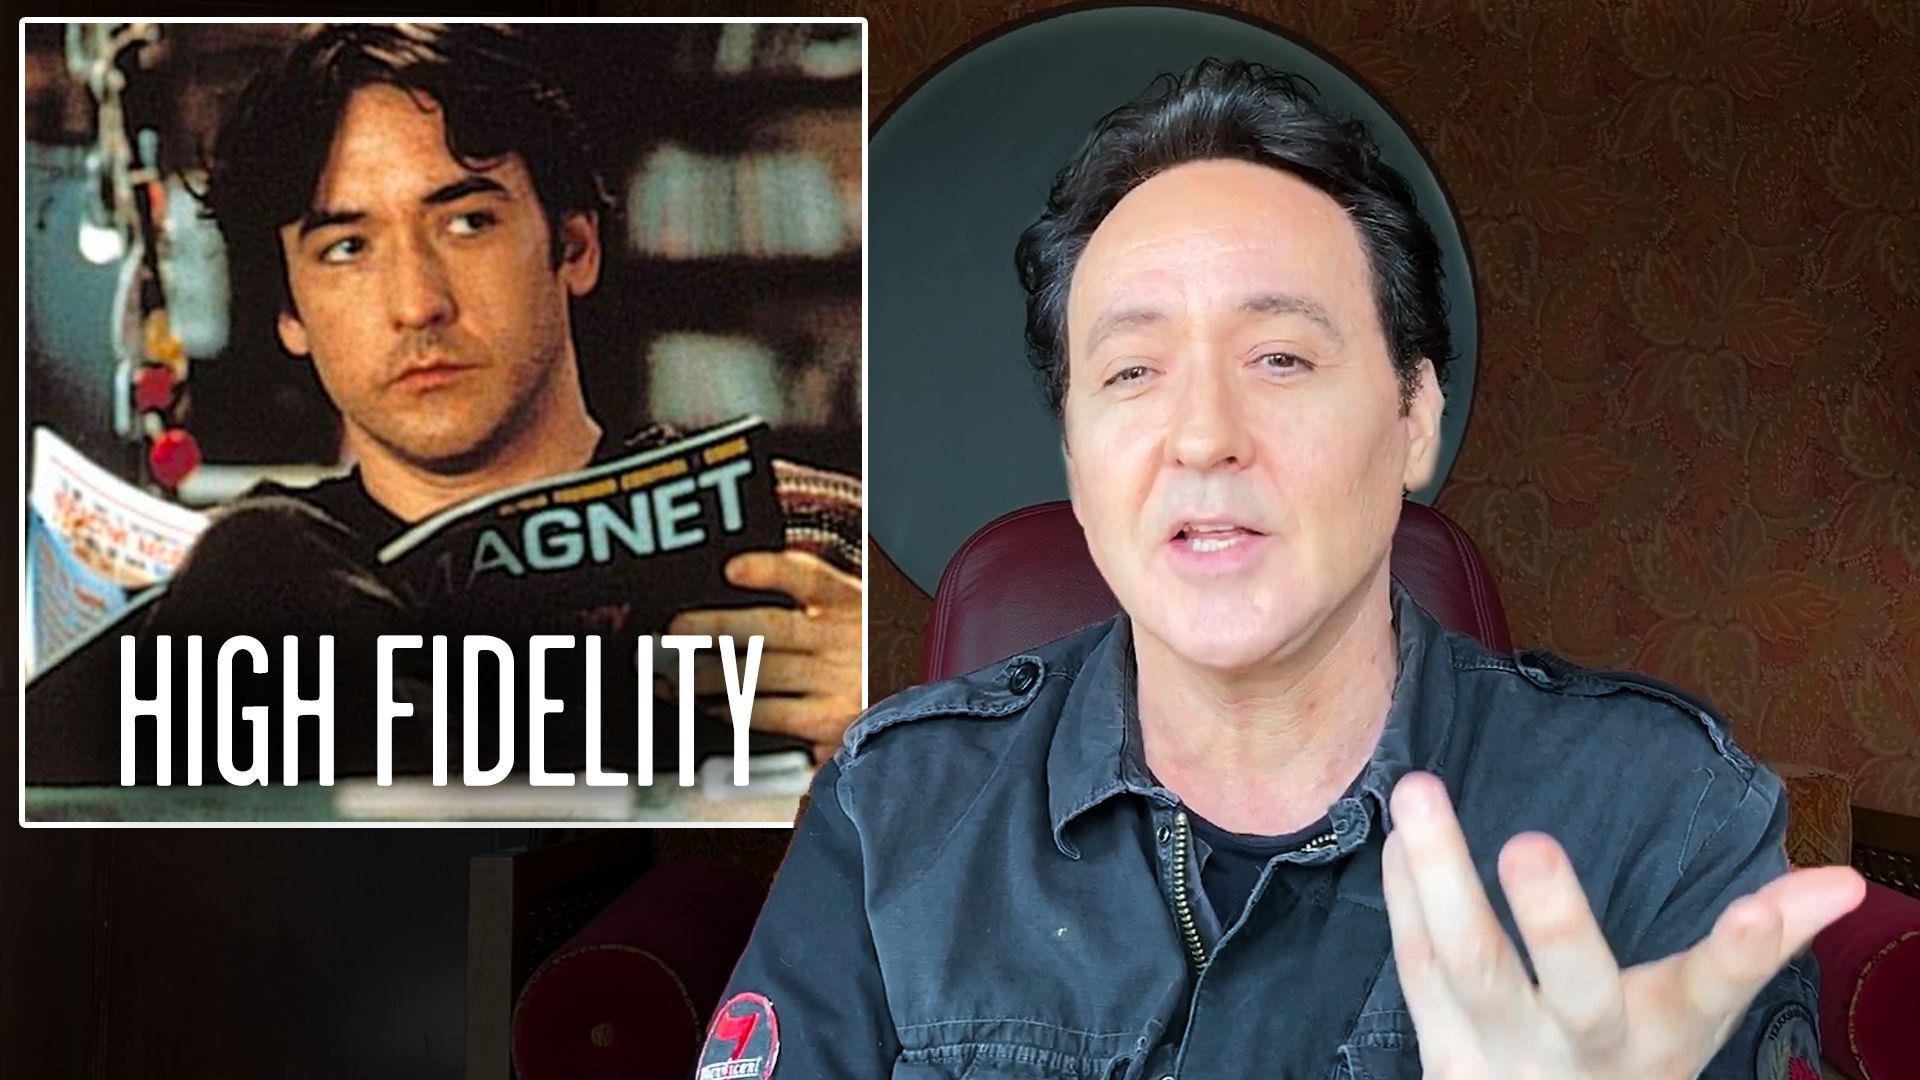 gq_iconic-characters-john-cusack-breaks-down-his-most-iconic-characters.jpg